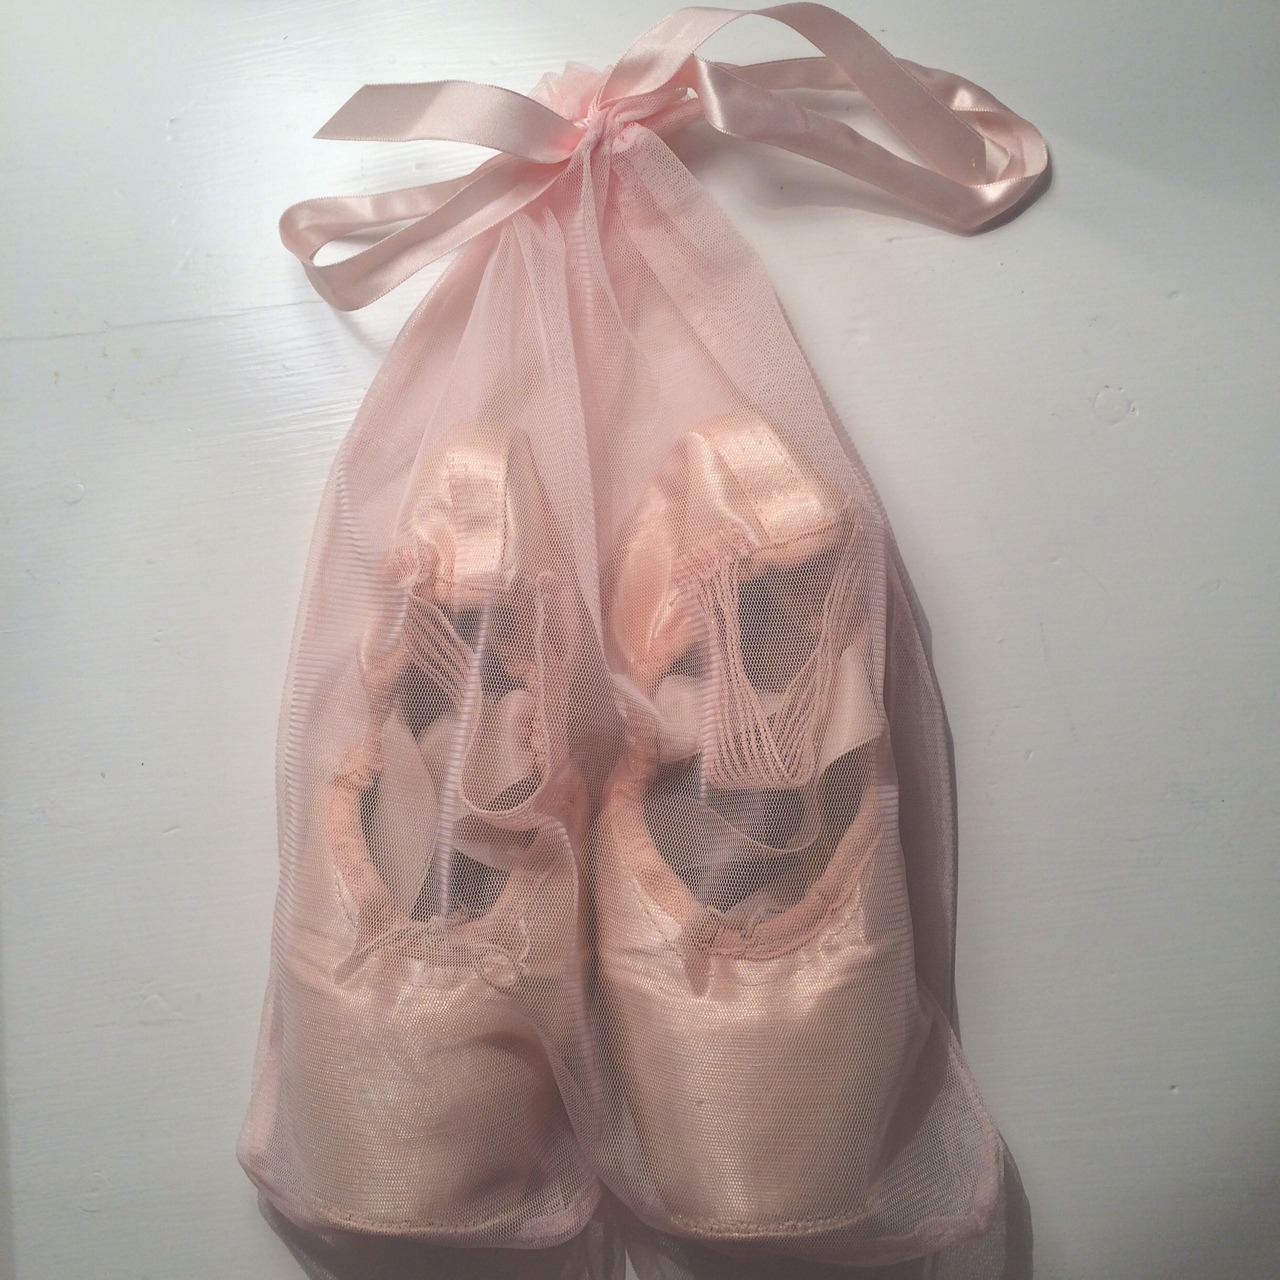 angel-veil:  angel-veil:  pain in a pretty package  Freed’s in a Bloch mesh bag…